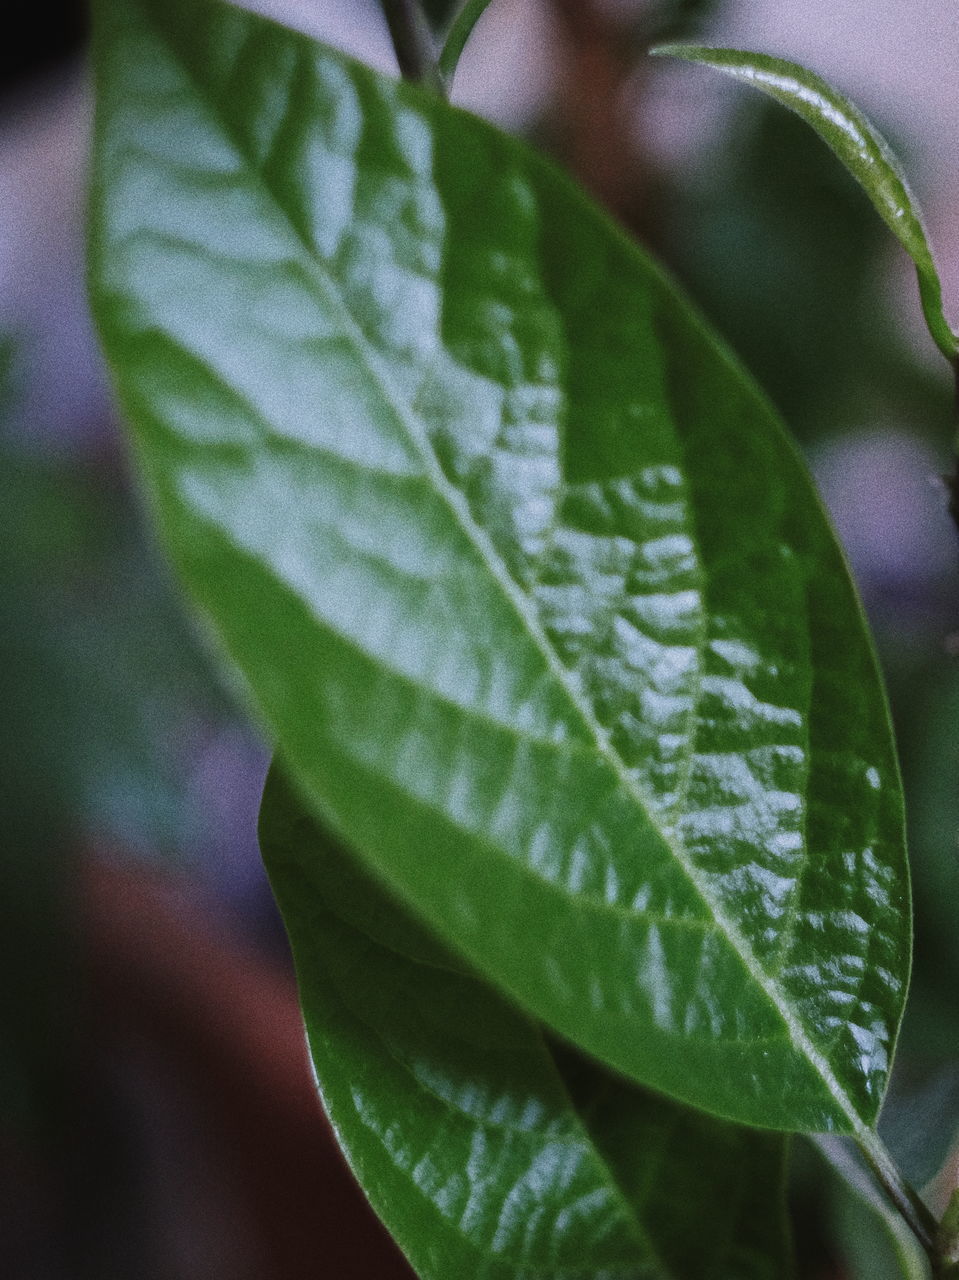 CLOSE-UP OF PLANT LEAVES